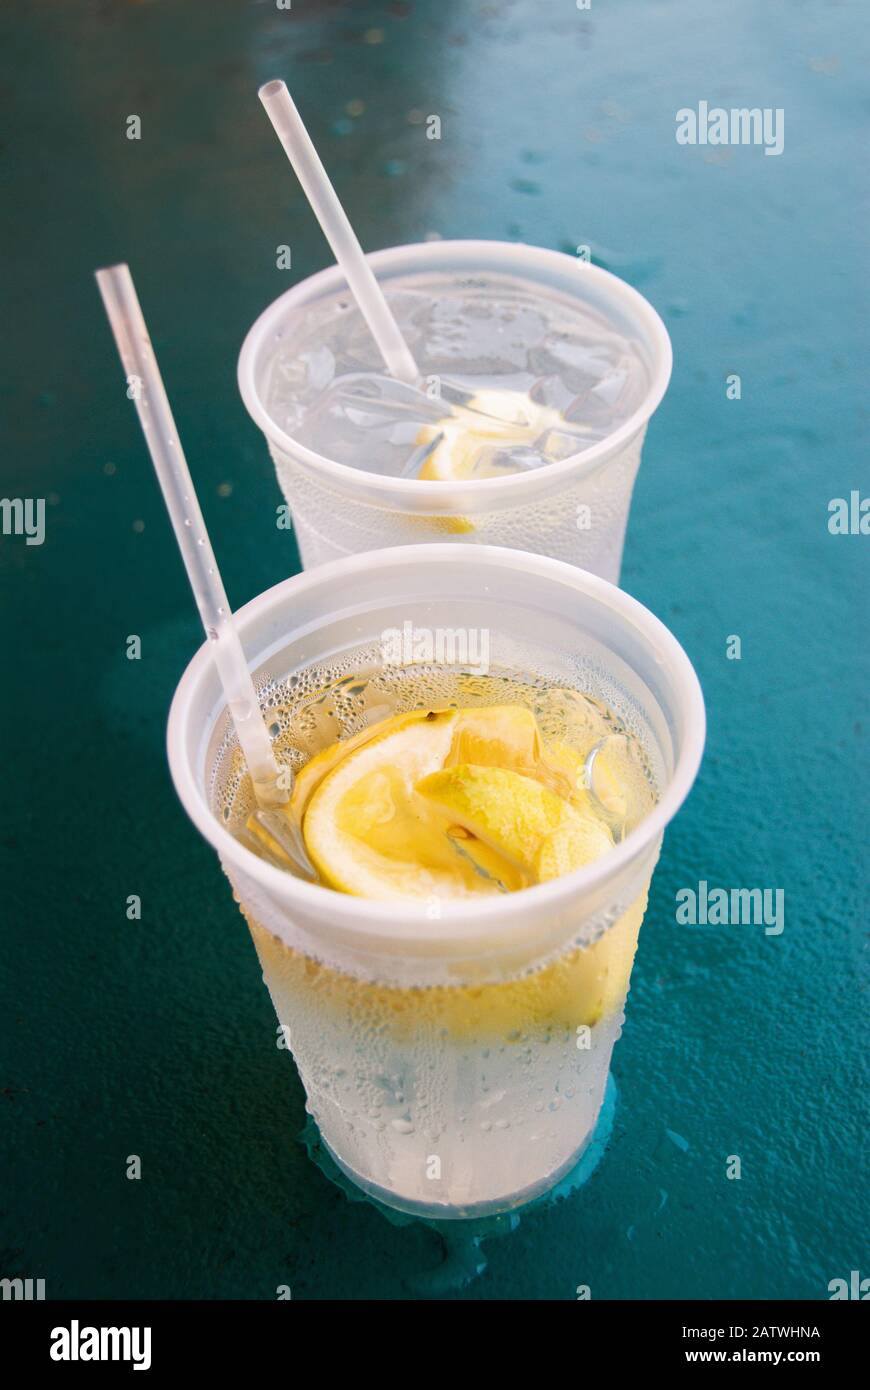 https://c8.alamy.com/comp/2ATWHNA/two-transparent-plastic-cups-filled-with-ice-cold-water-and-lemon-slices-shot-at-an-outdoor-restaurant-2ATWHNA.jpg